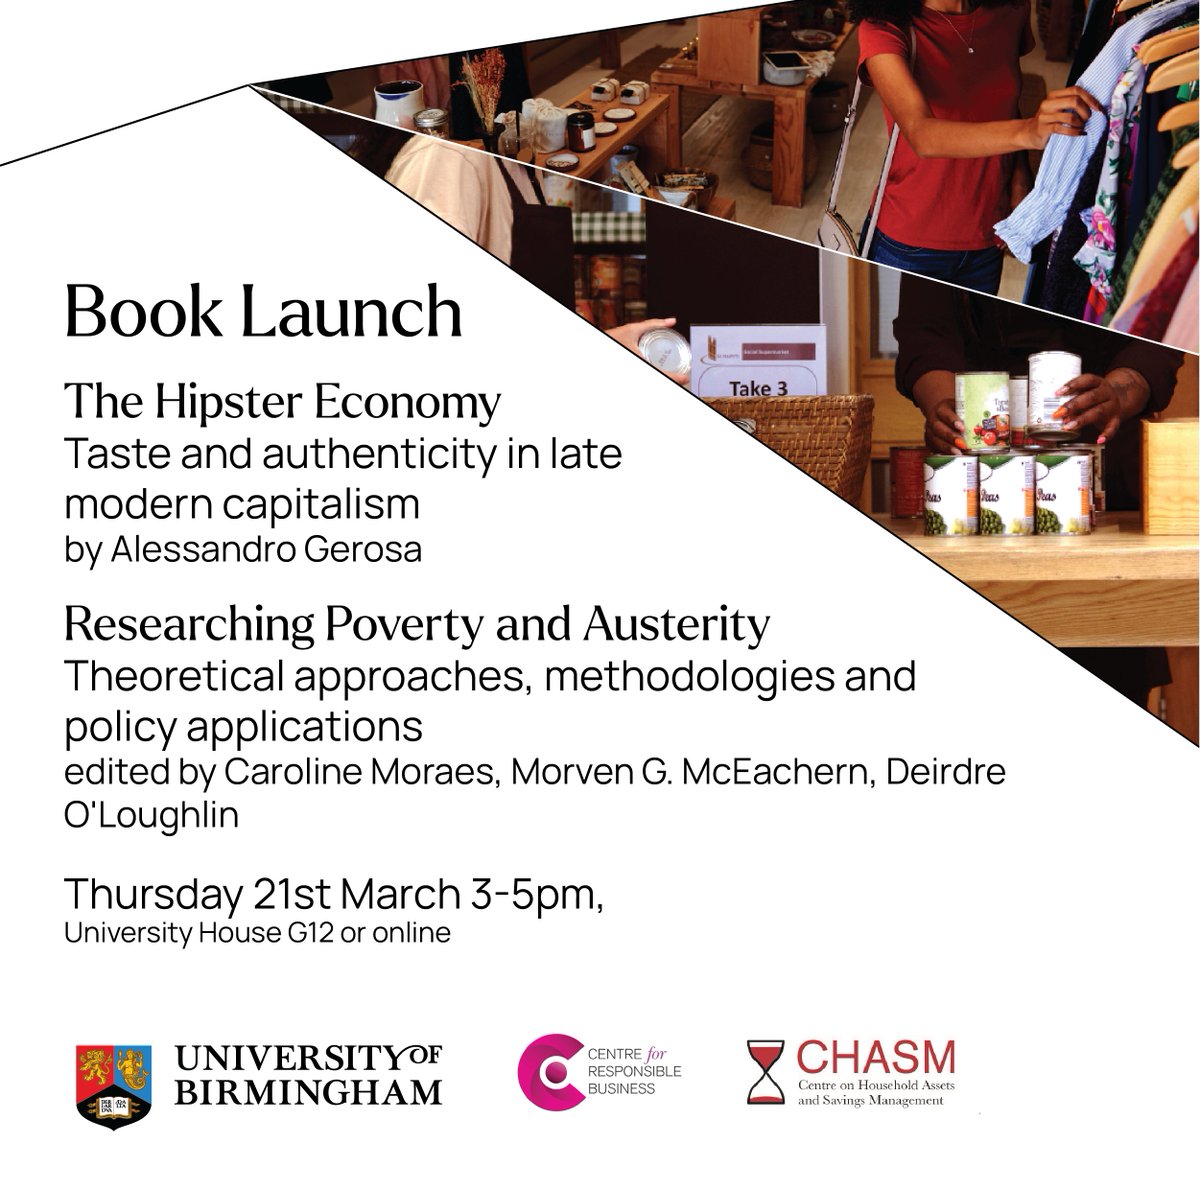 #BookLaunch #alert! Are you curious about my #HipsterEconomy book? Thursday 21st of March is the day! I joined forces with @C_Moraes_BBS, @Deeolough, and @ProfMcEachern for a joint book presentation on #taste, #class, and #capitalism. Register here: forms.office.com/e/eG7kWeJUjJ